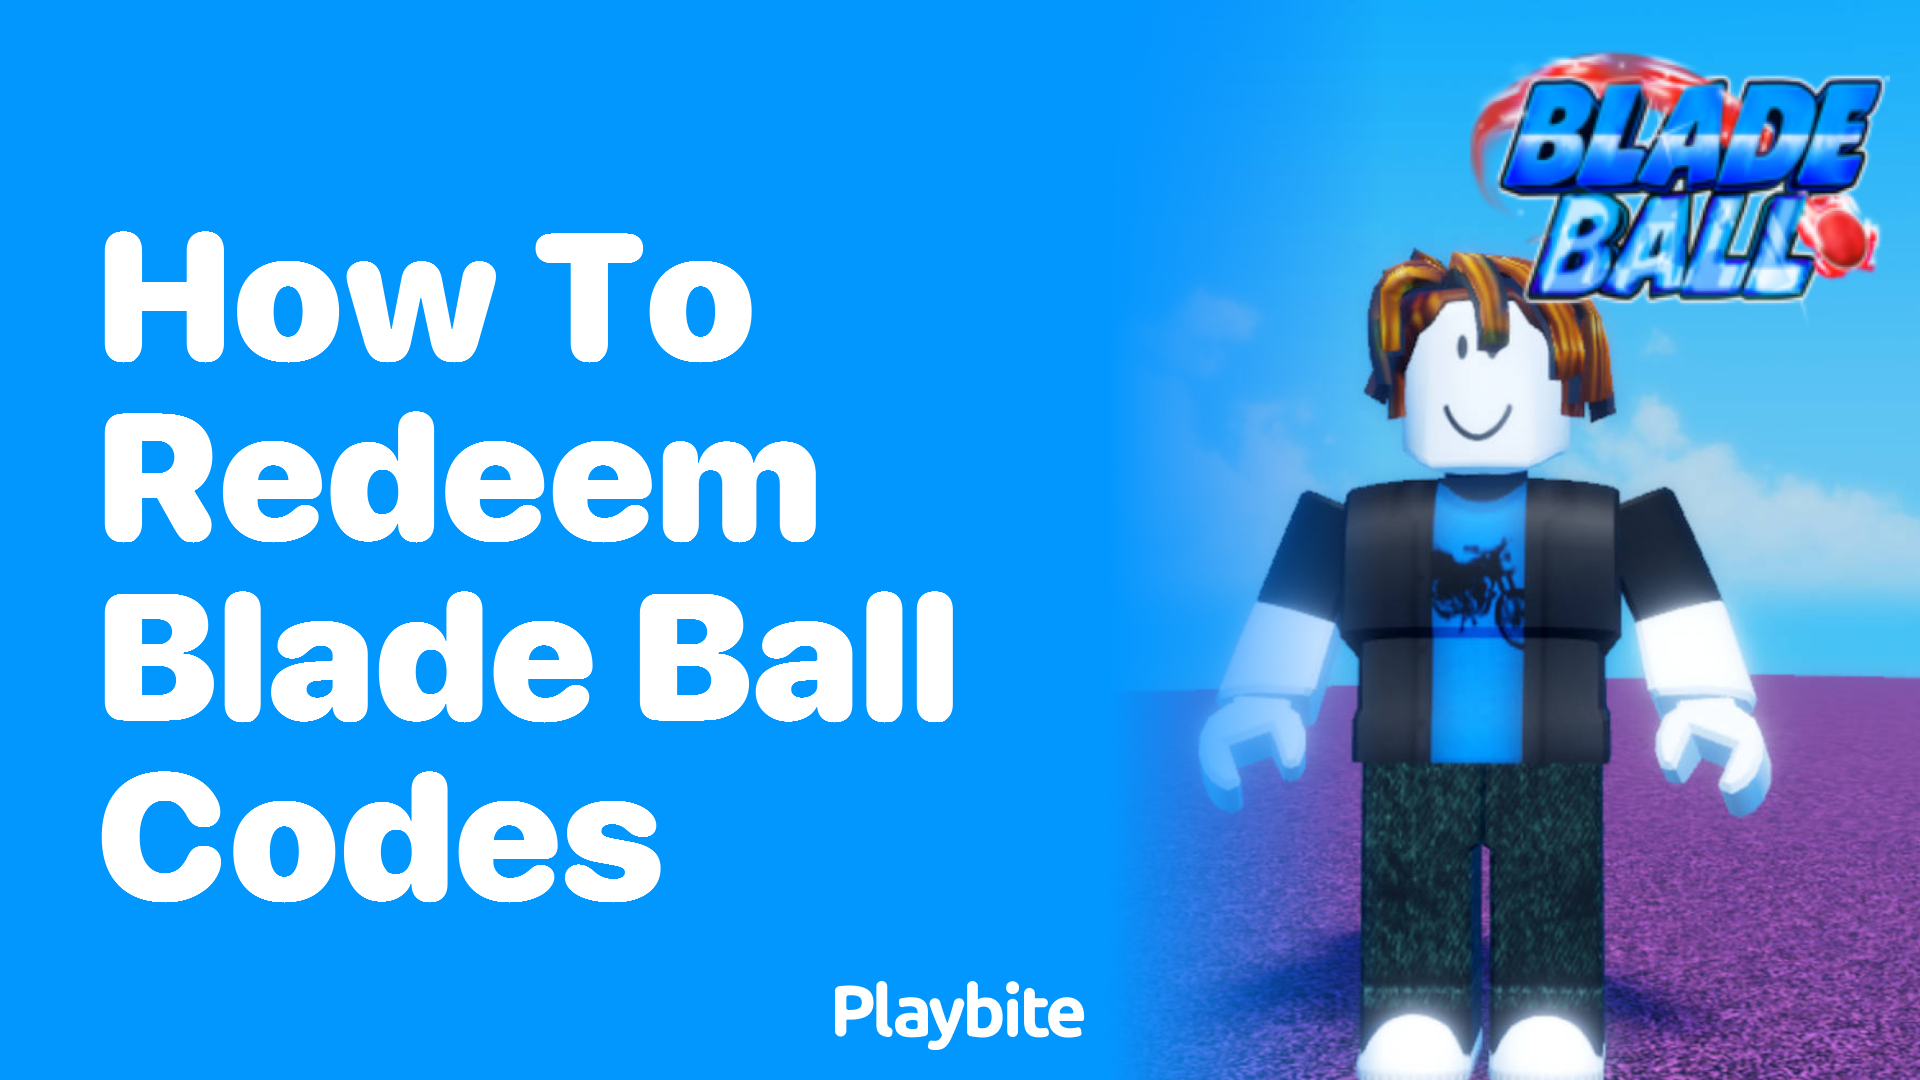 How to redeem Blade Ball codes in Roblox